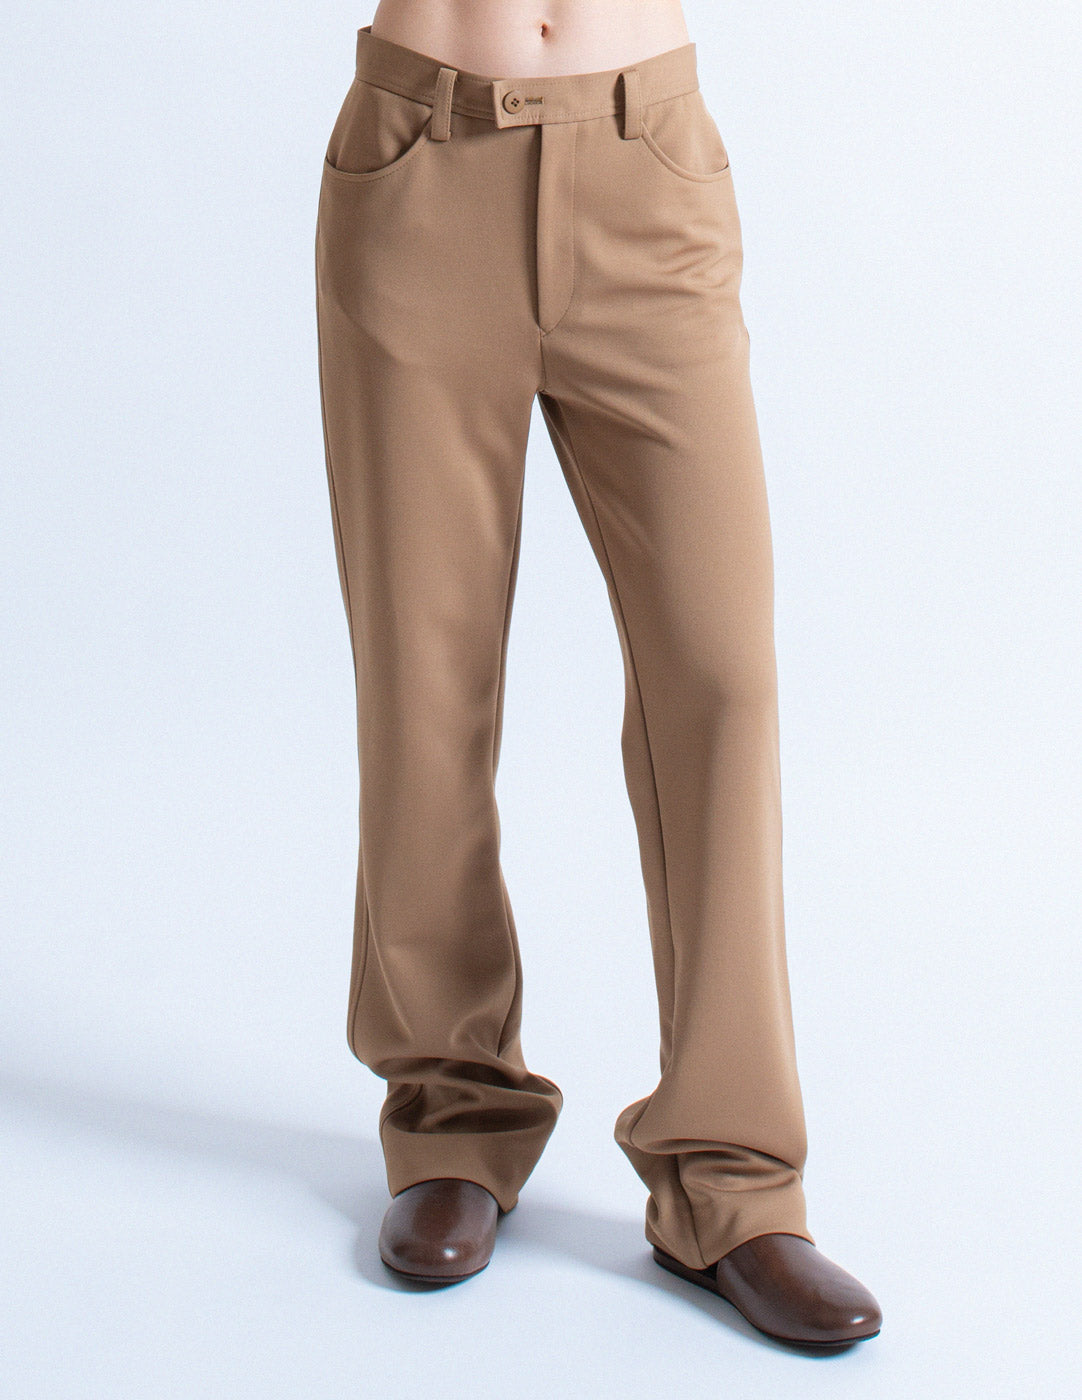 Issey Miyake camel tone long blazer and trousers set trousers detail